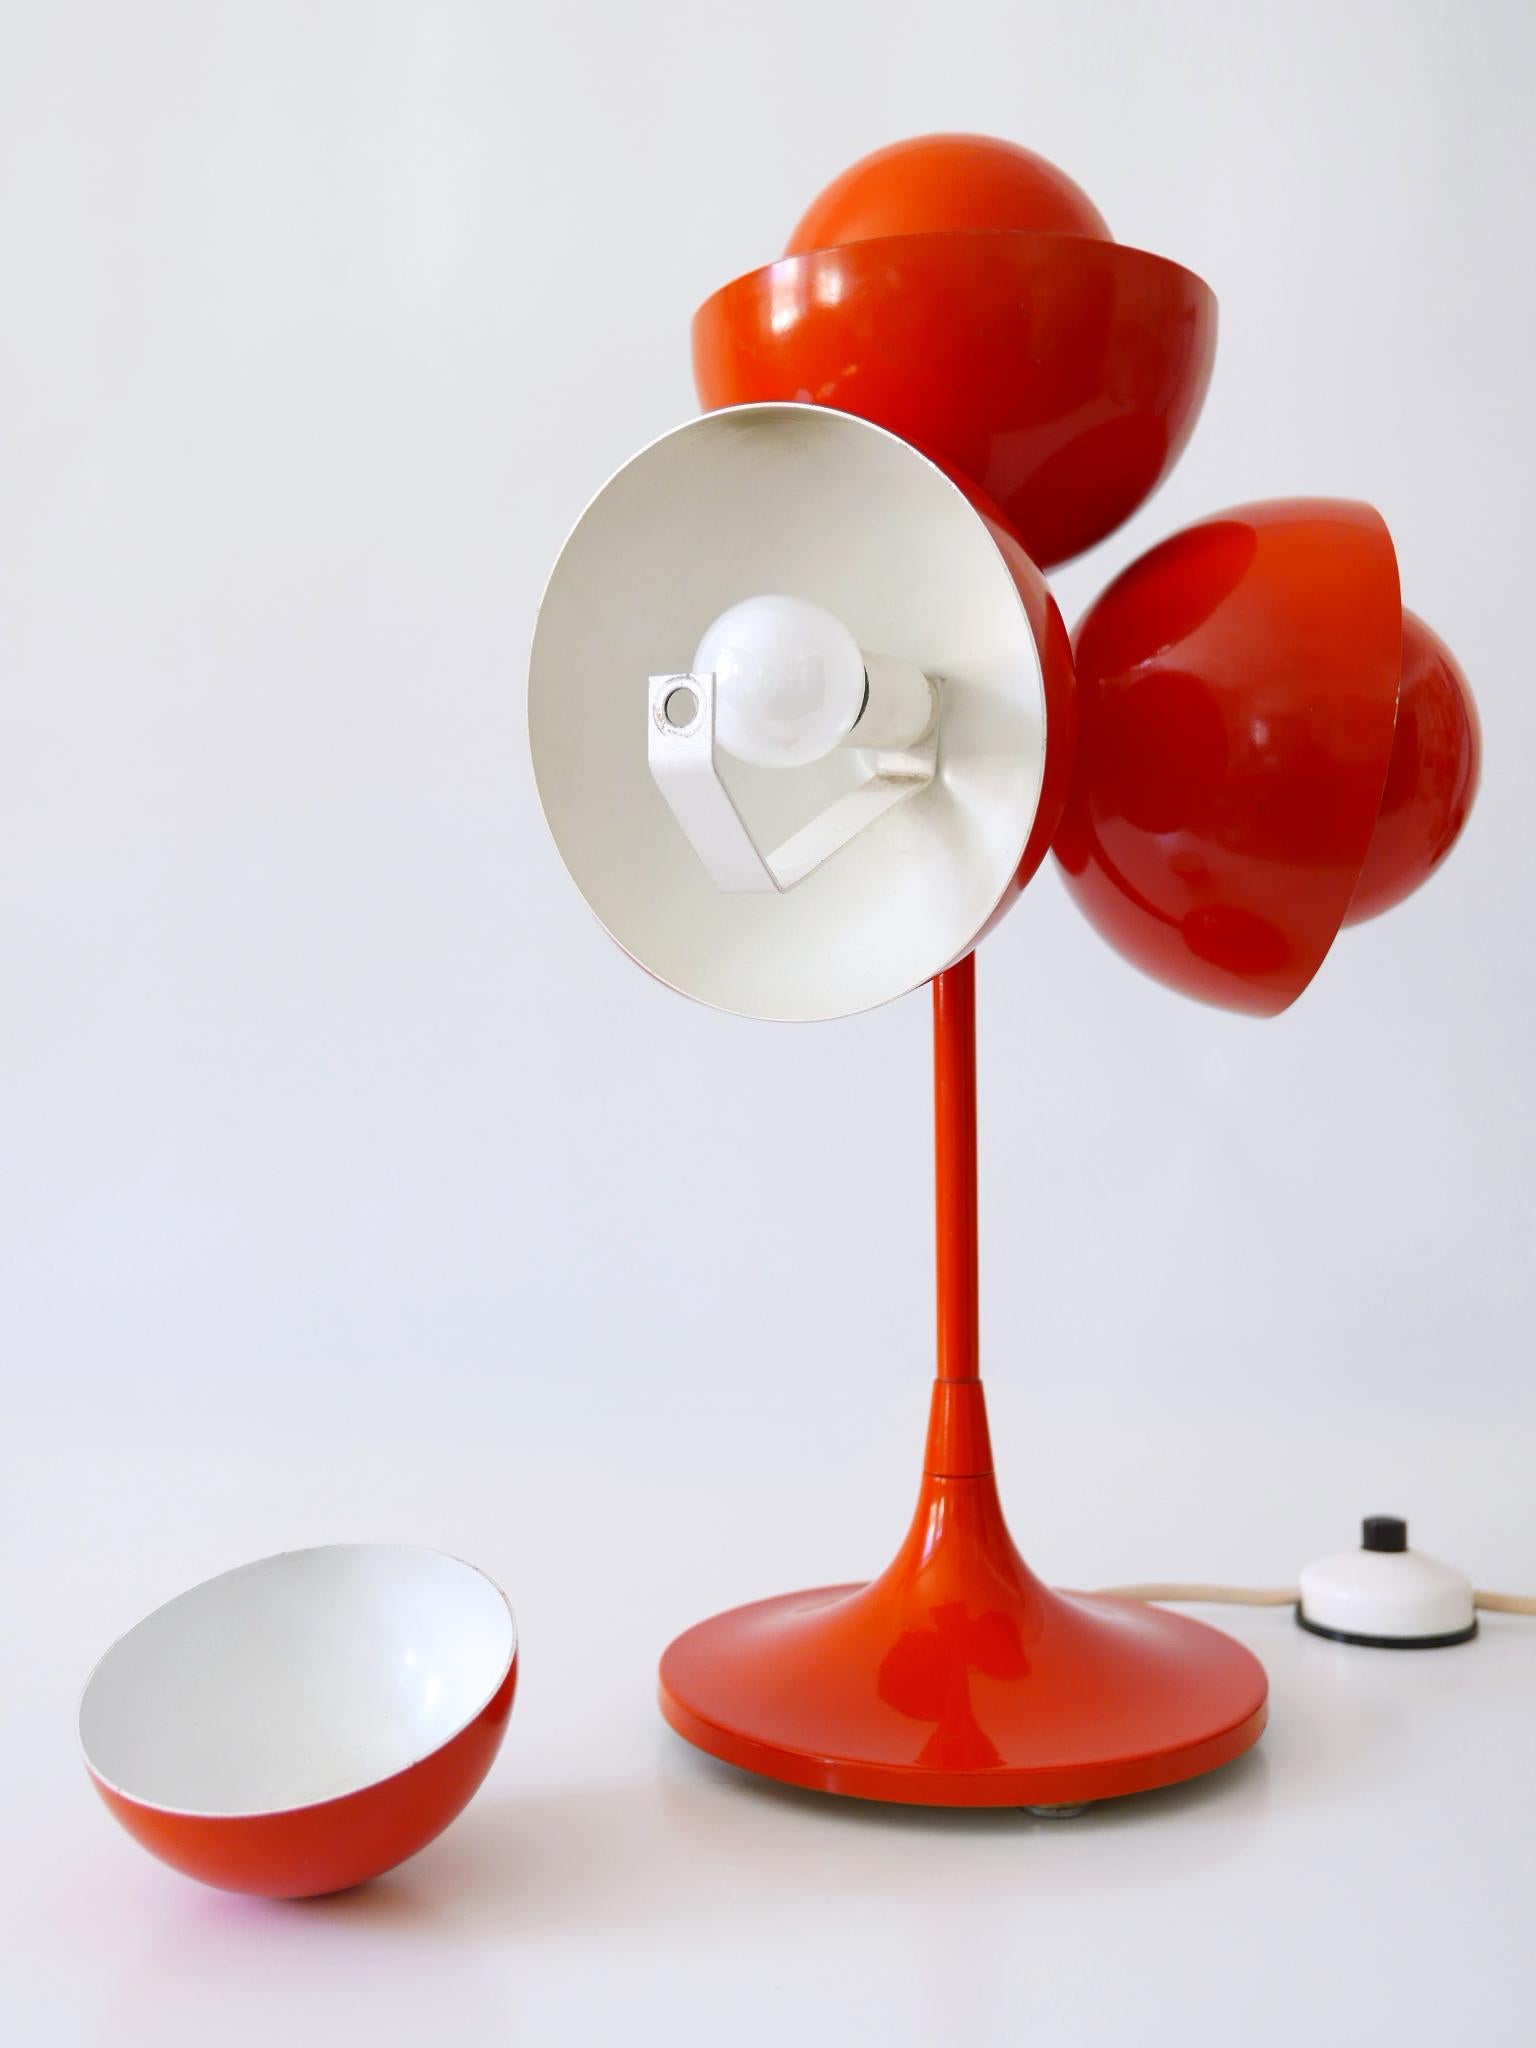 Exceptional & Lovely Mid-Century Modern Flowerpot Table Lamp, Germany, 1970s For Sale 11